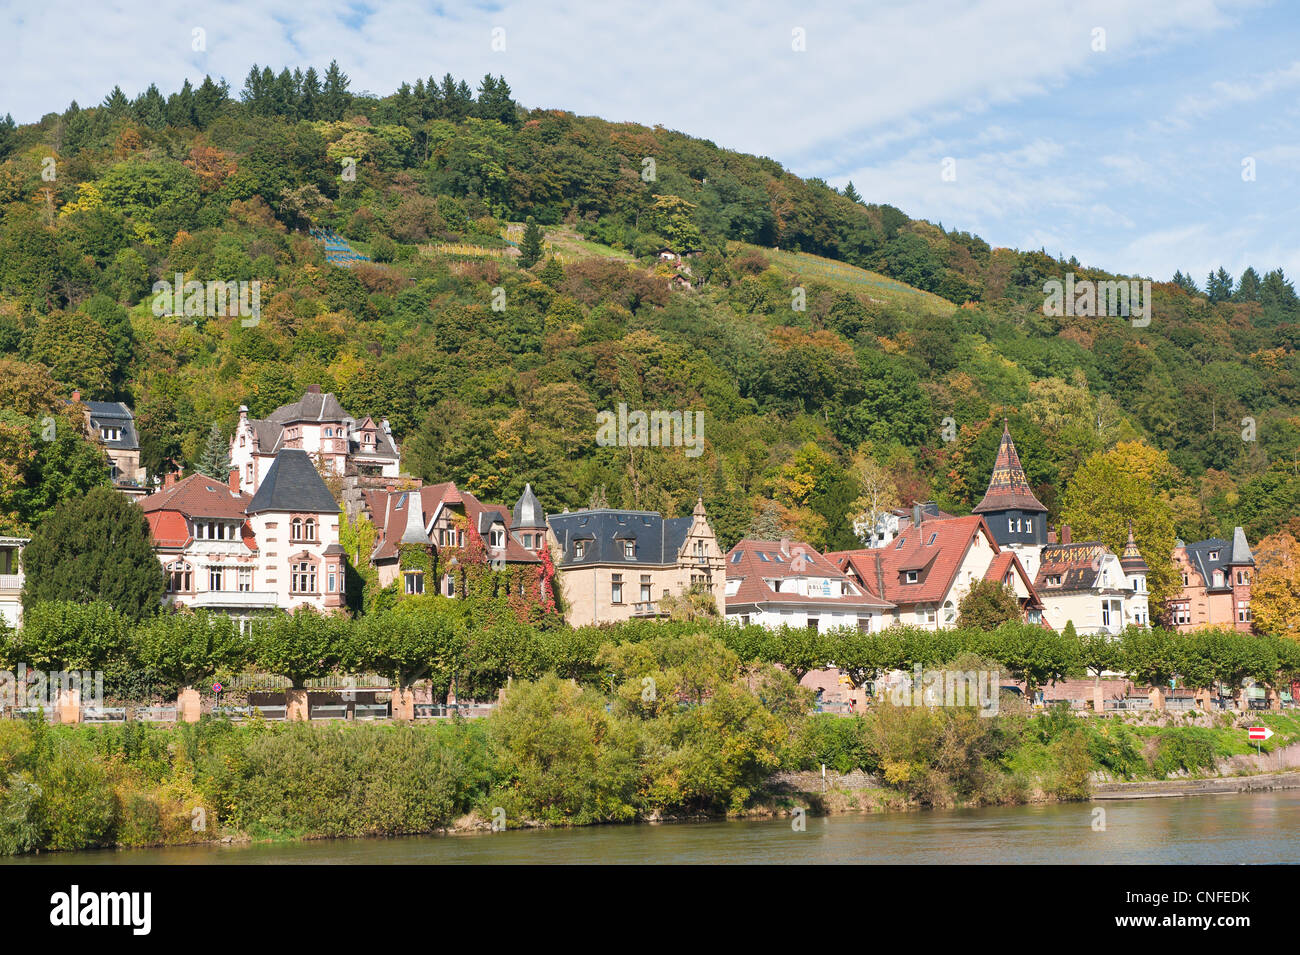 Old Houses lining the north shore of the Neckar River, Heidelberg, Germany. Stock Photo